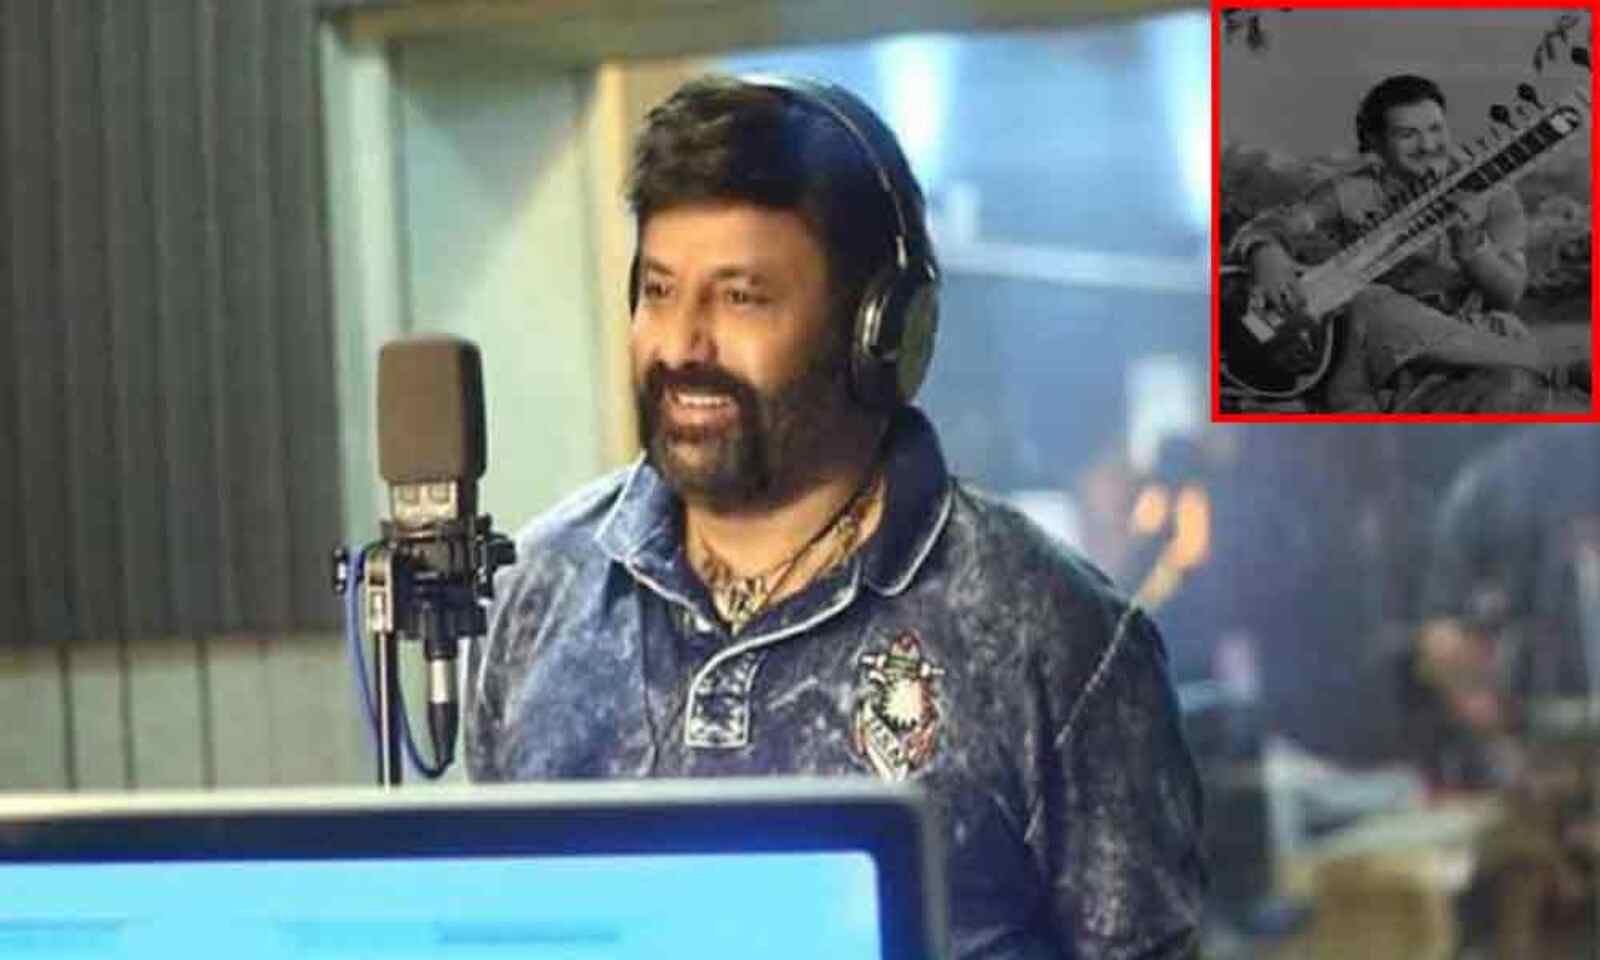 Balakrishna shocked everyone by singing the song live